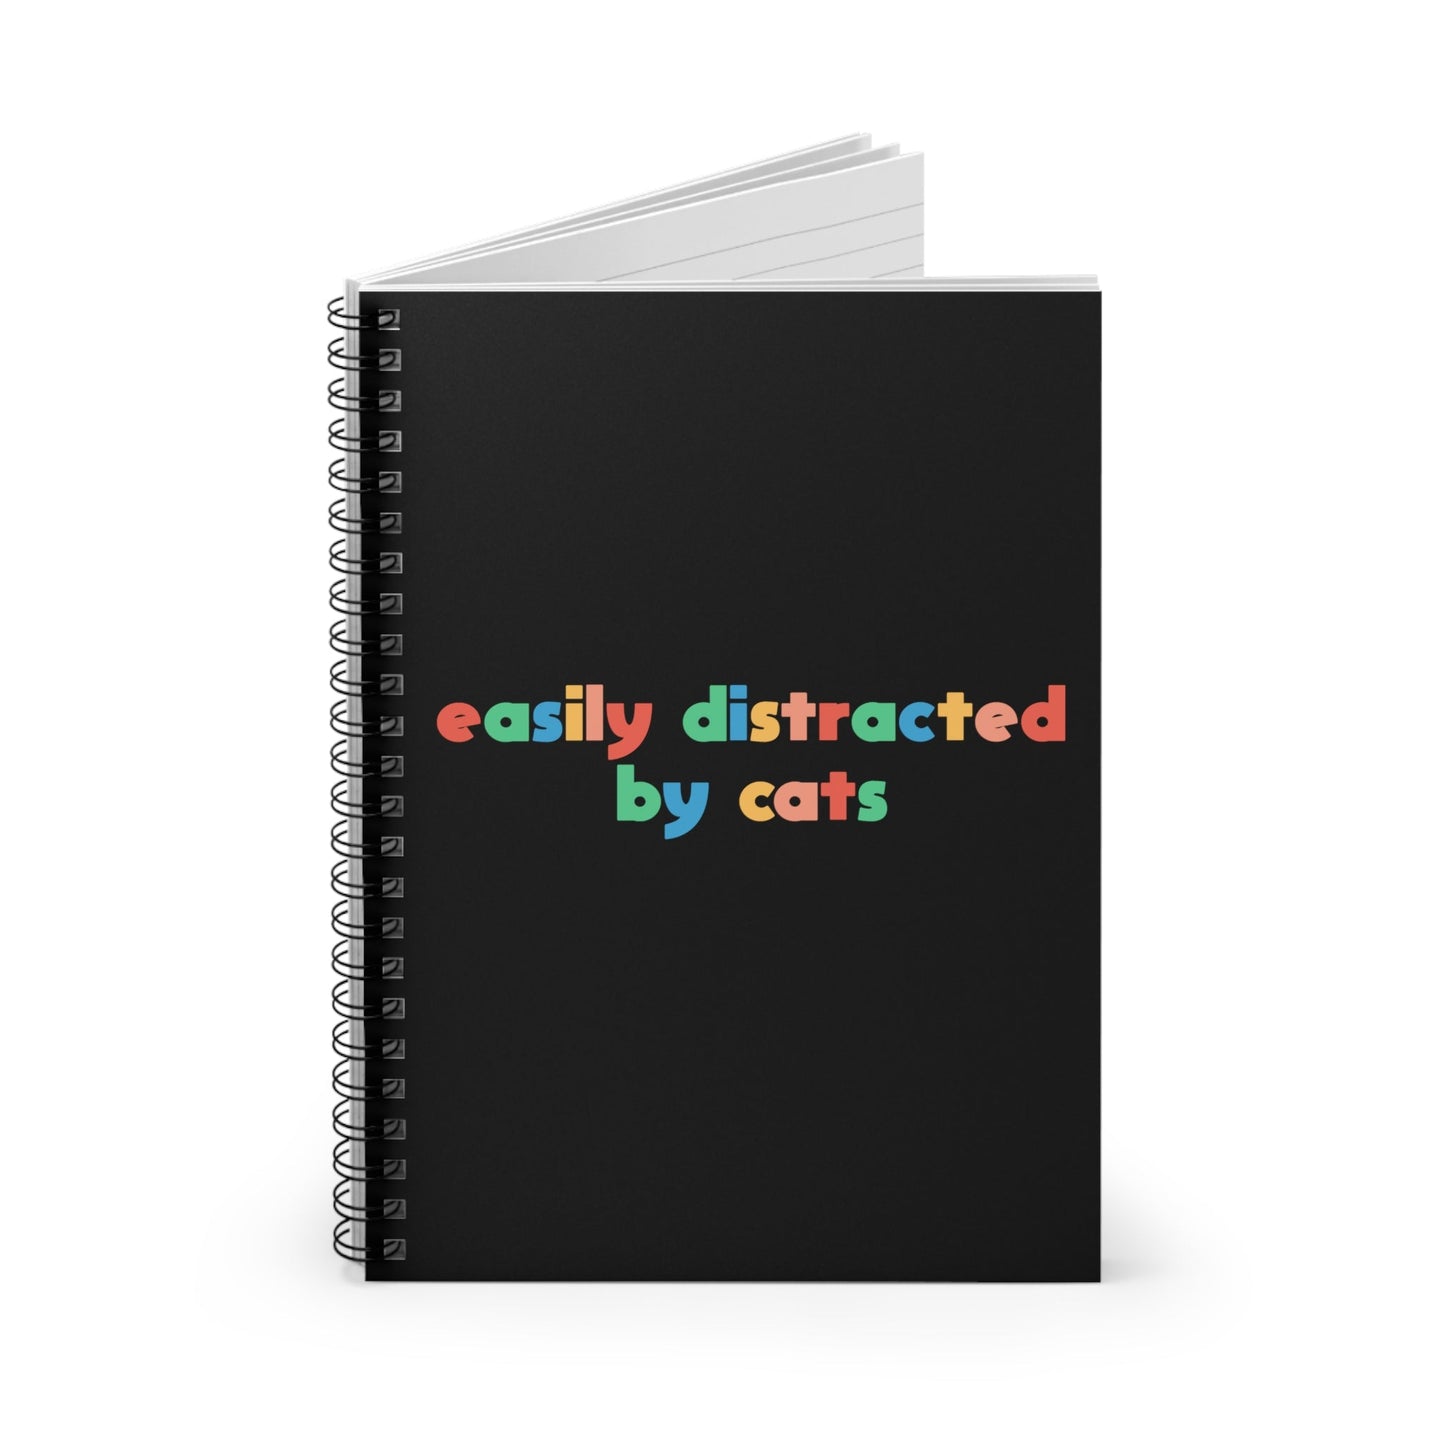 Easily Distracted by Cats | Notebook - Detezi Designs-17205654263738264149